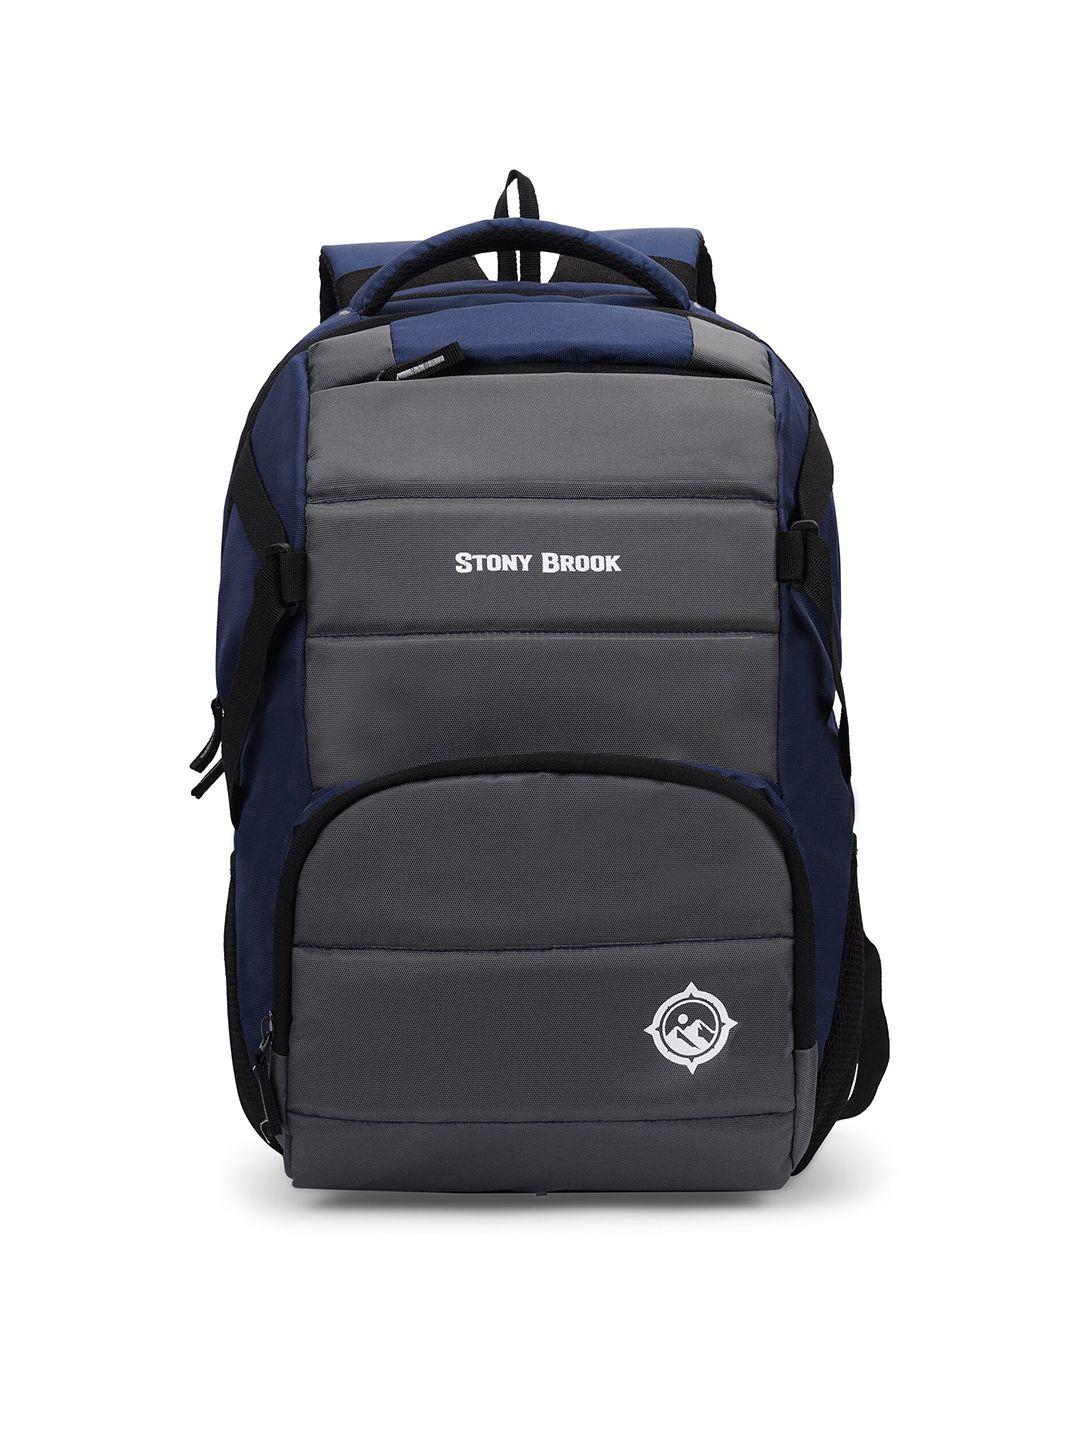 stony brook by nasher miles printed laptop backpack